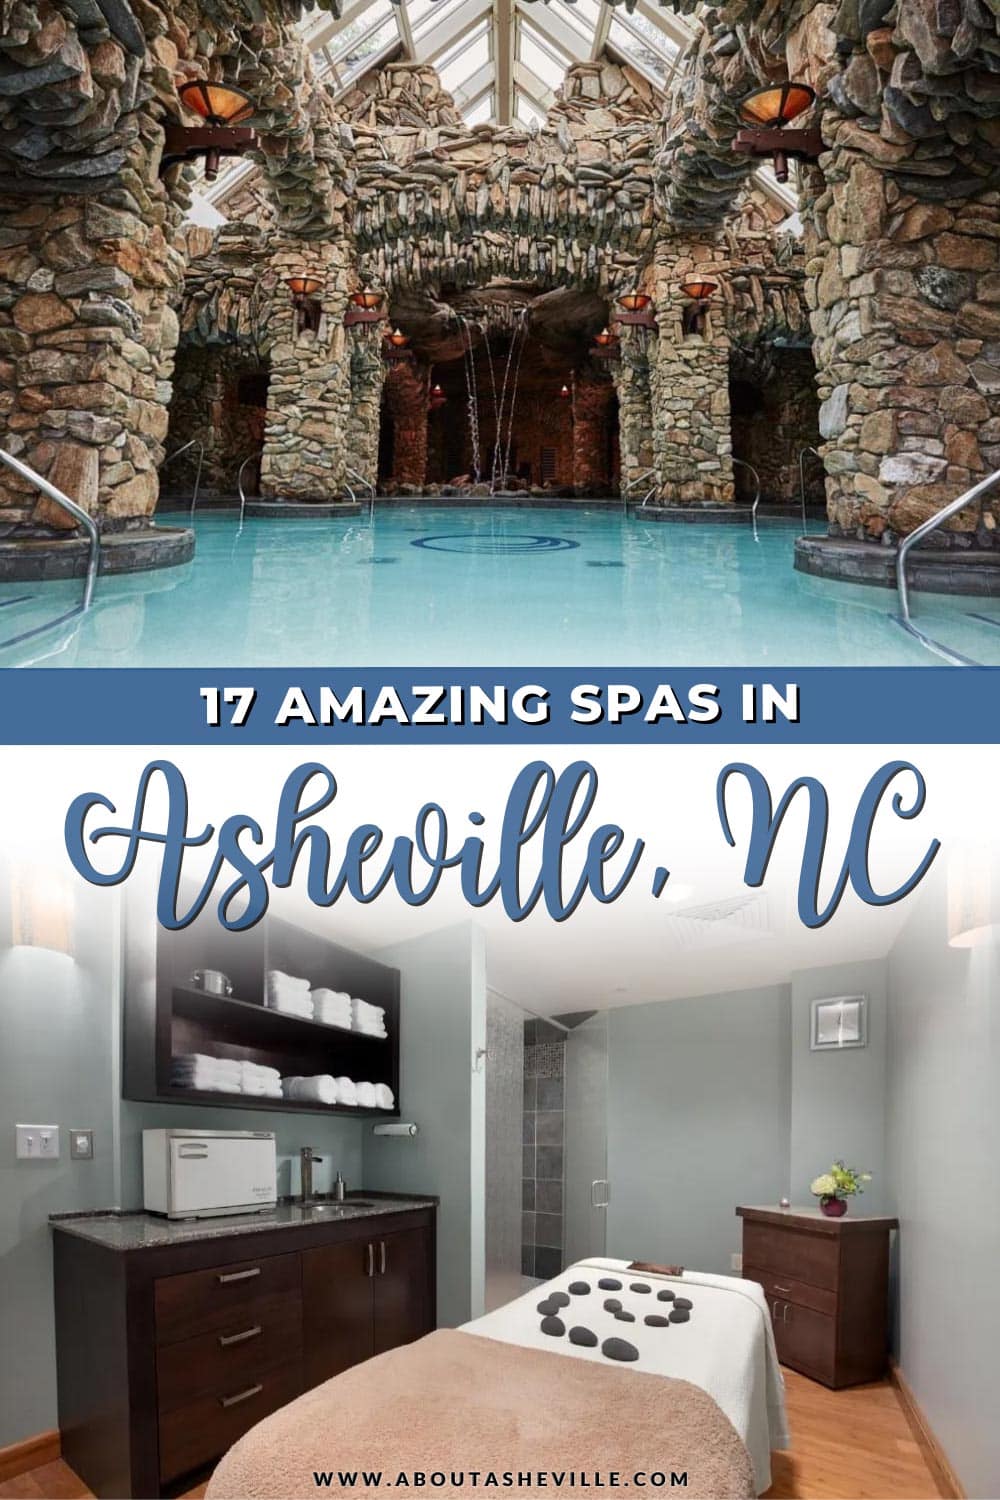 The 18 Best Spas And Wellness Experiences In Asheville - About Asheville